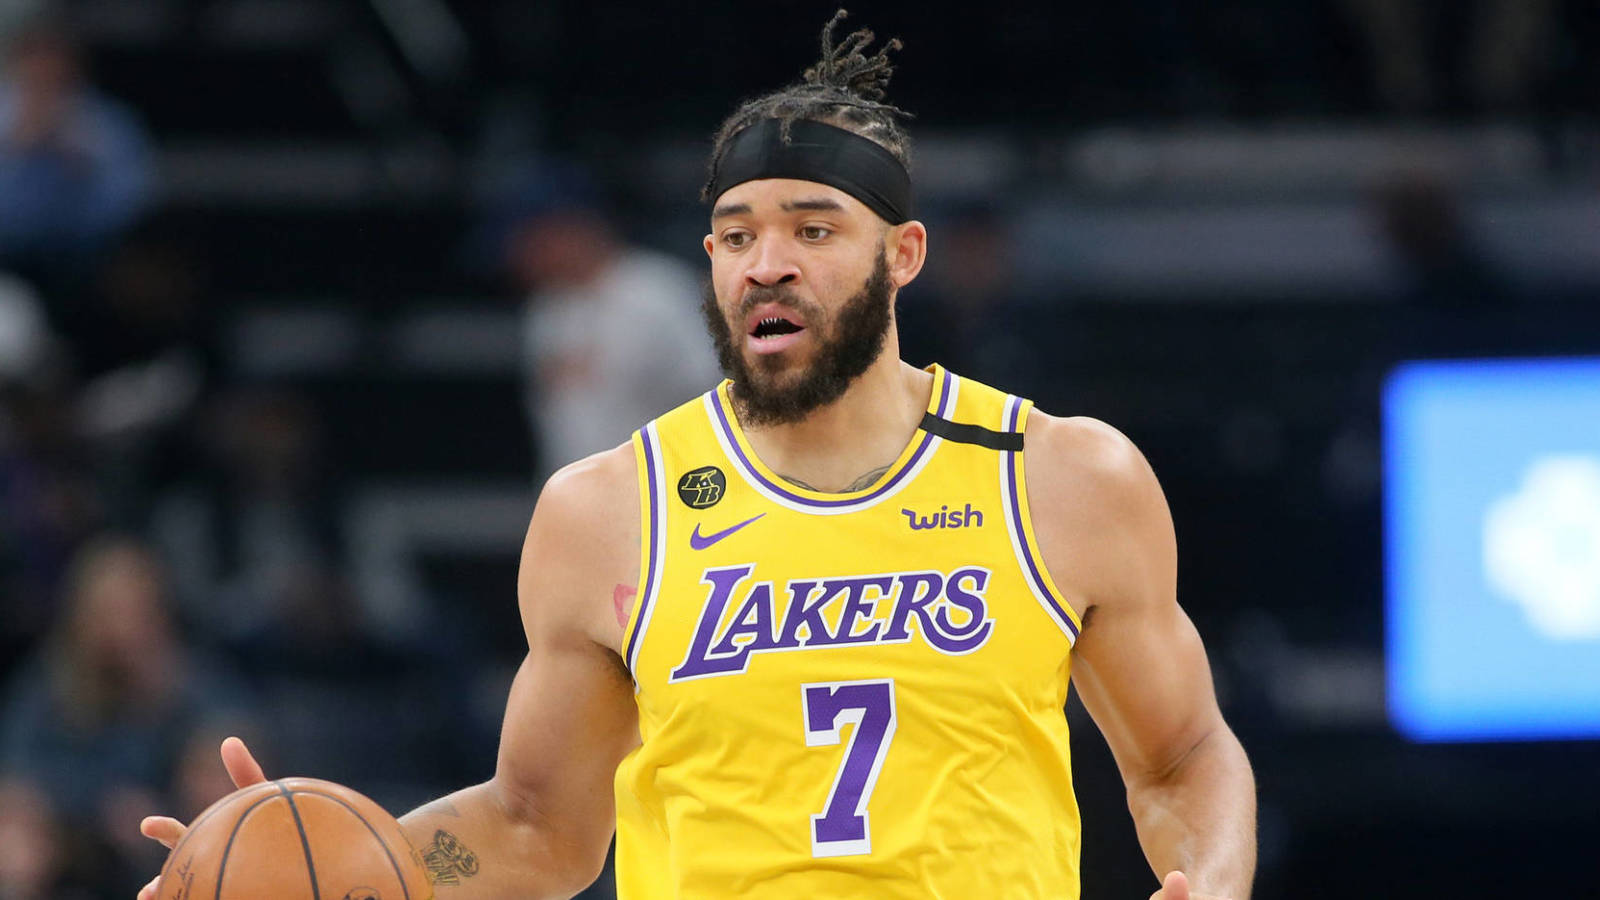 Lakers' JaVale McGee ready to win another championship | Yardbarker